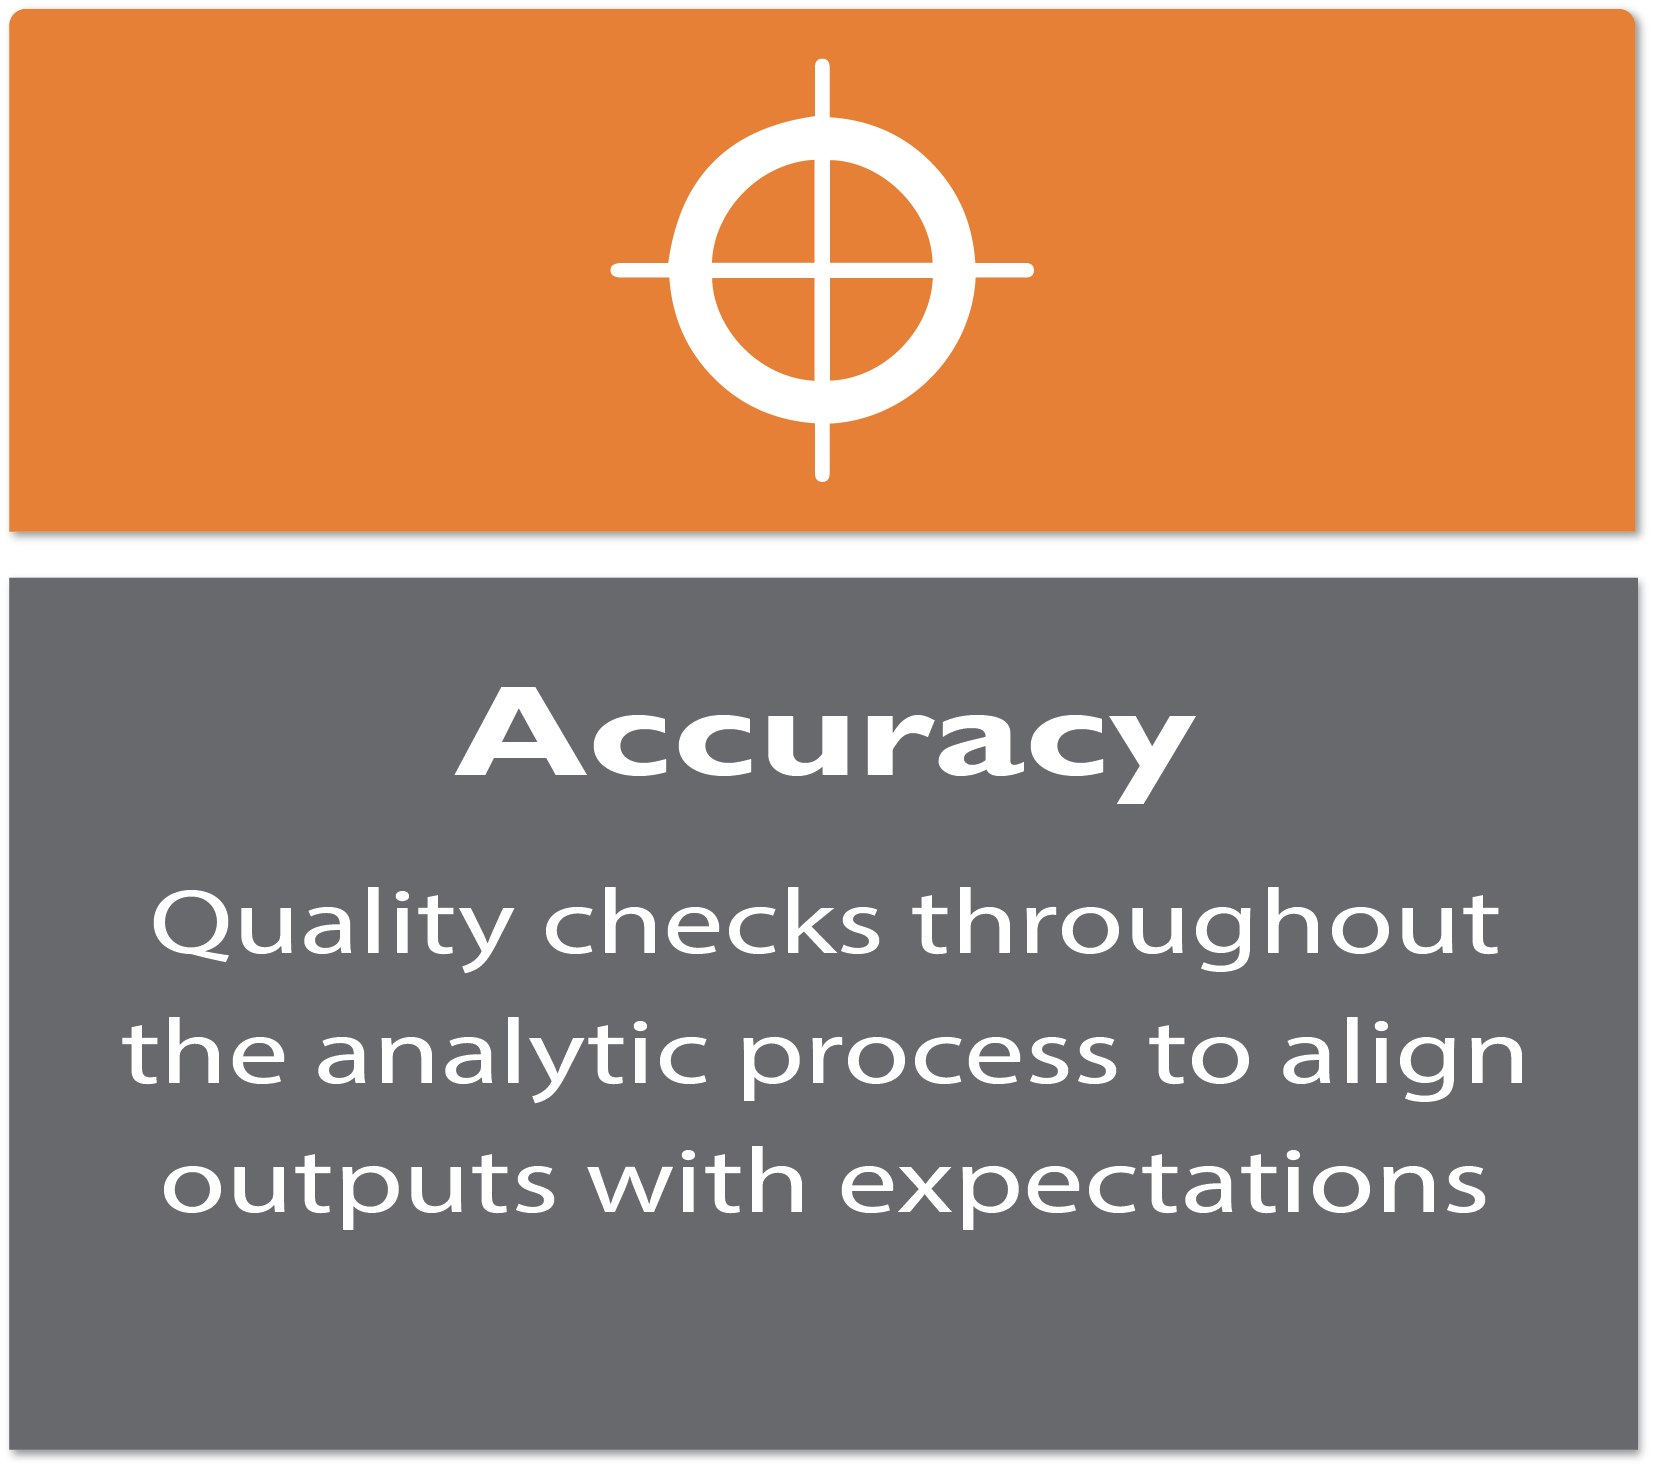 Accuracy: Quality checks throughout the analytic process to align outputs with expectations. 